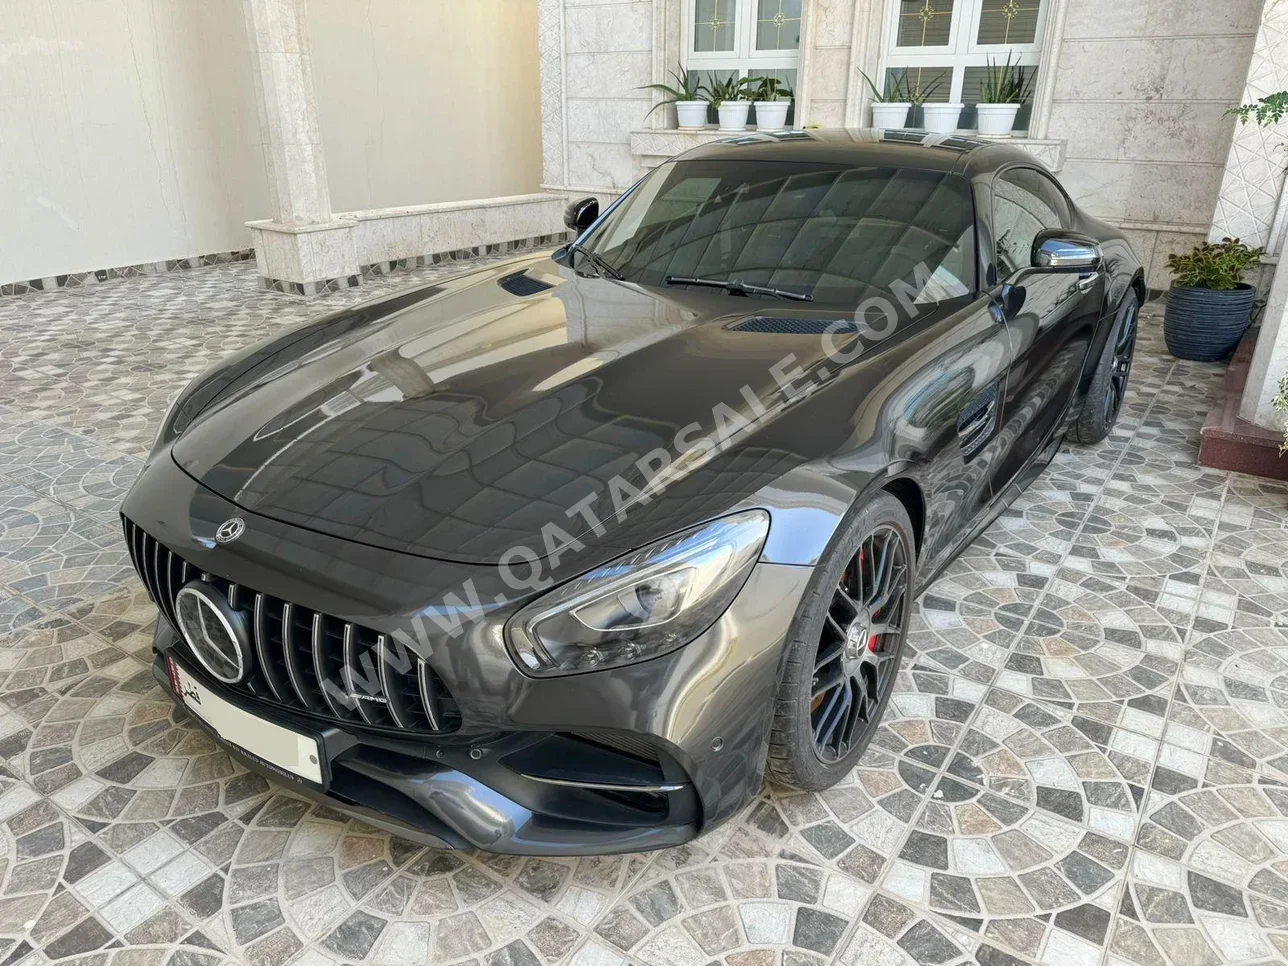 Mercedes-Benz  GT  C Edition 1 of 500  2018  Automatic  17,000 Km  8 Cylinder  Rear Wheel Drive (RWD)  Coupe / Sport  Gray